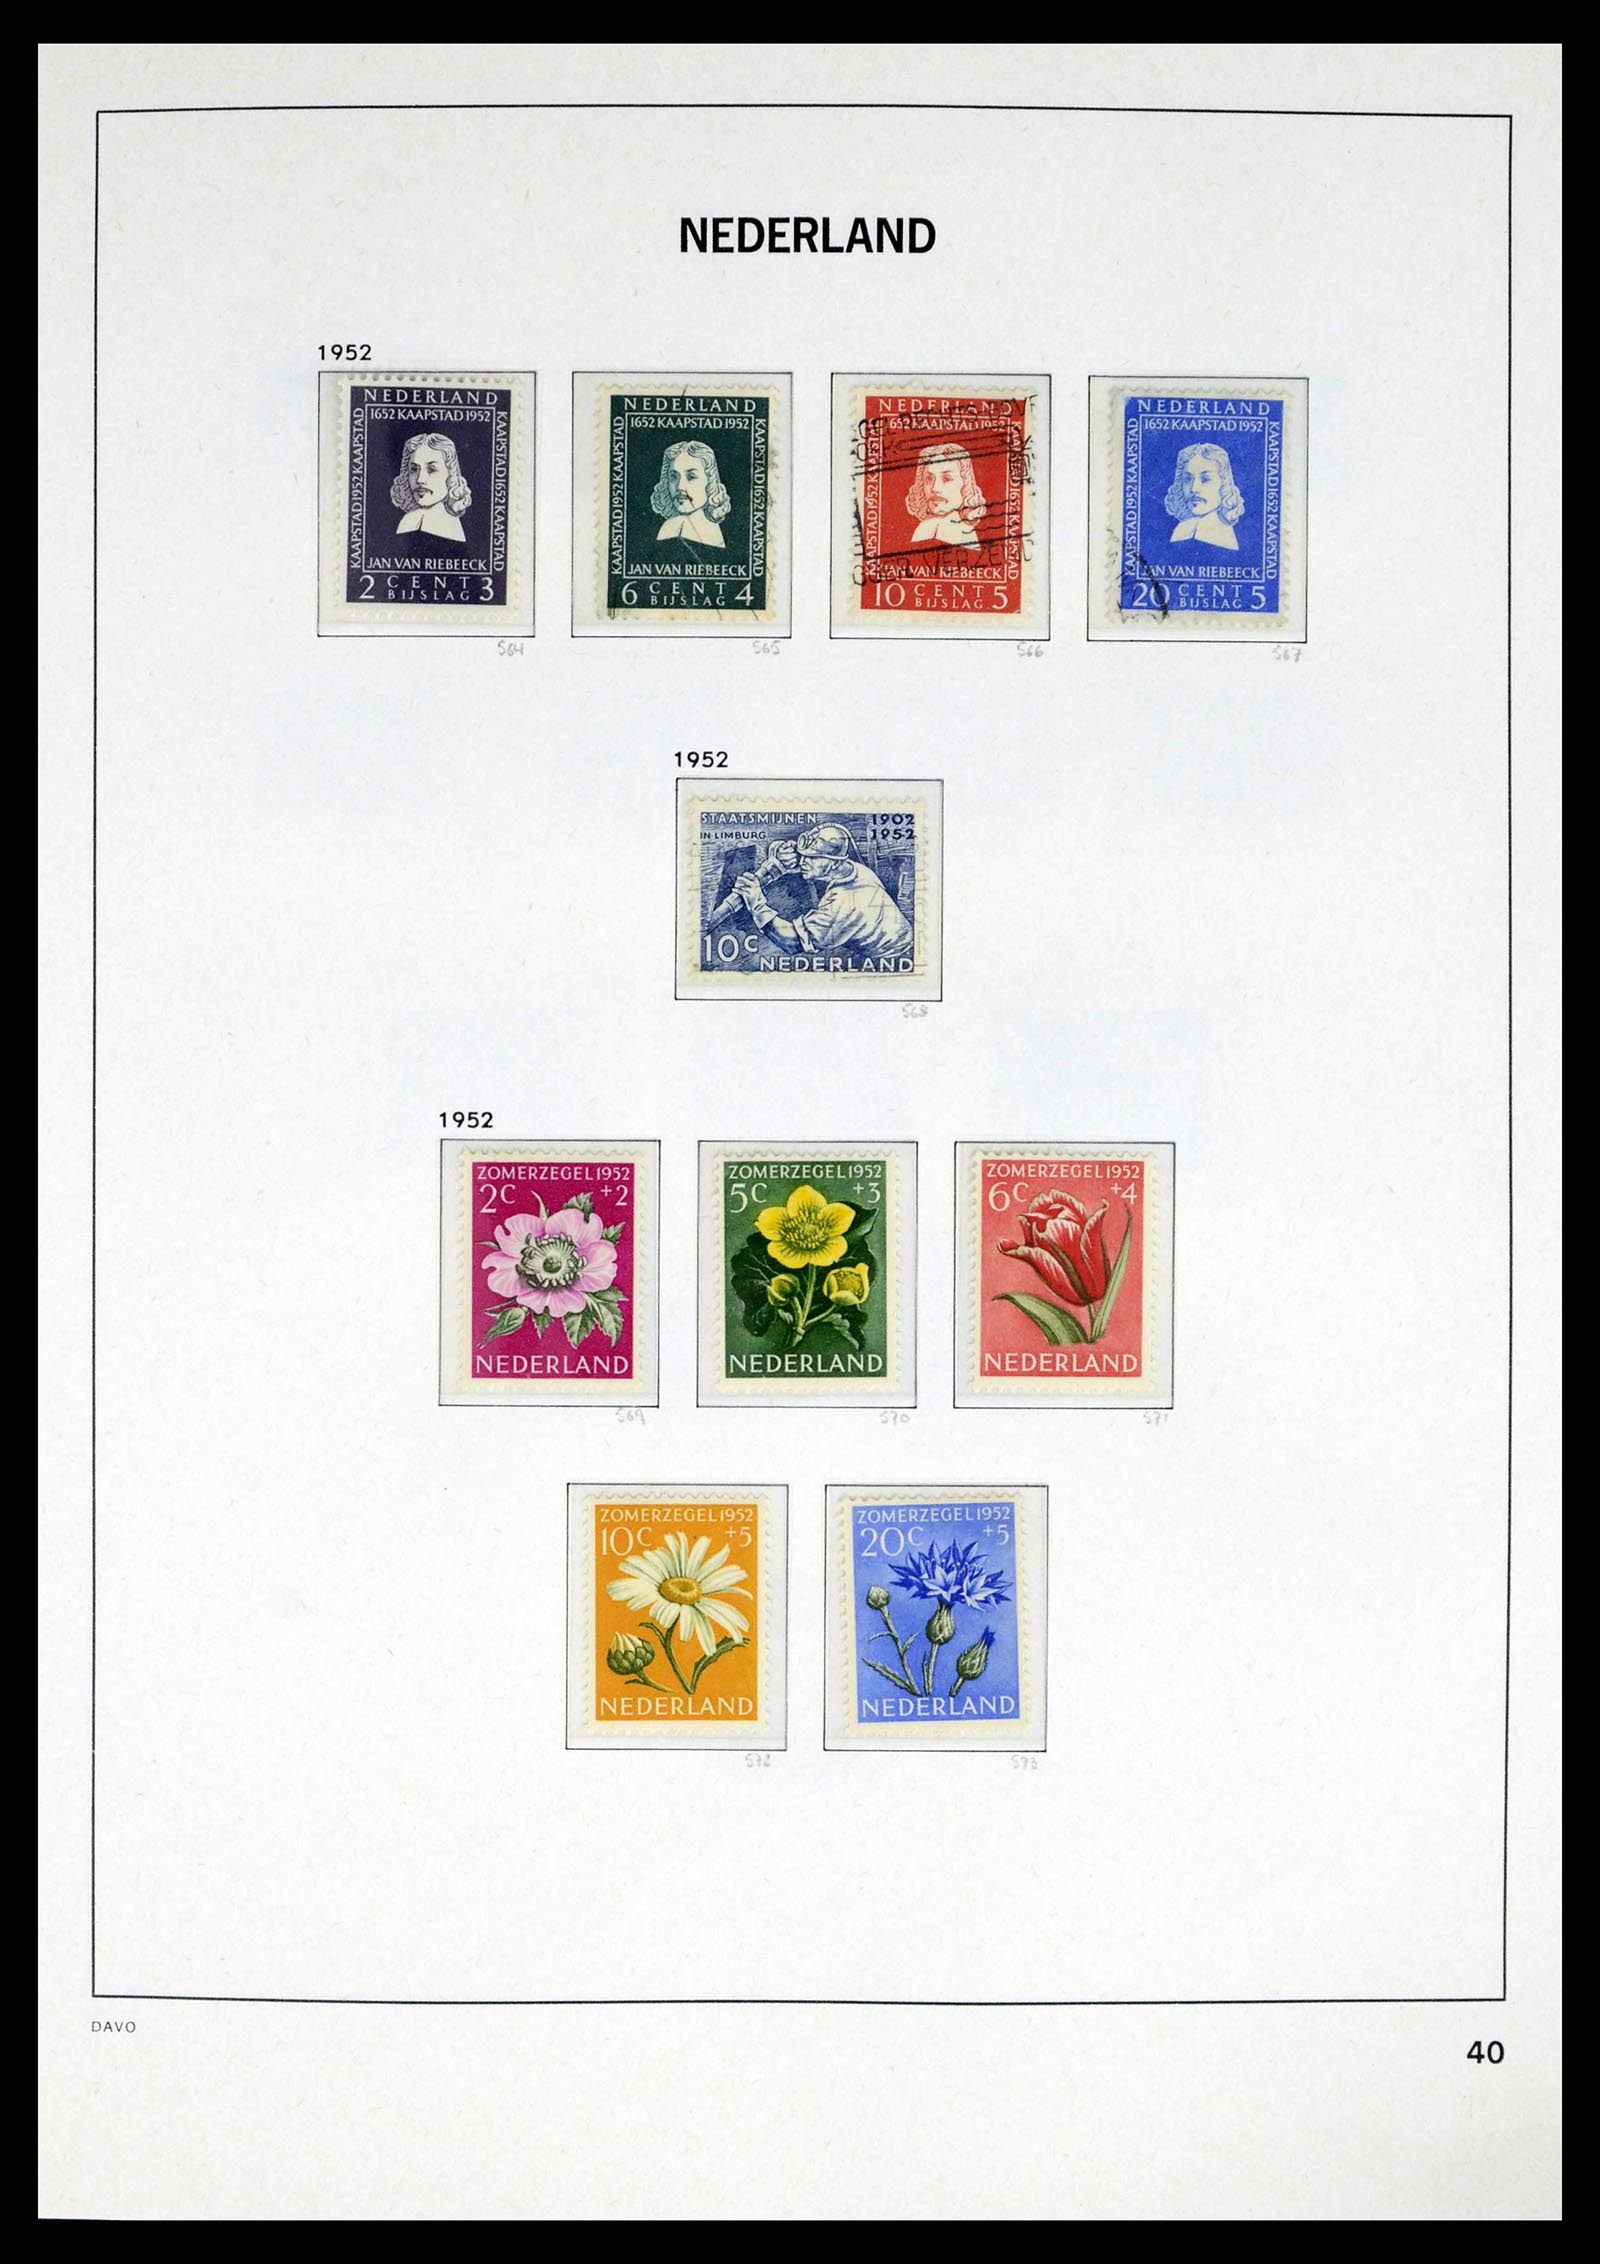 38174 0040 - Stamp collection 38174 Netherlands 1852-2015.